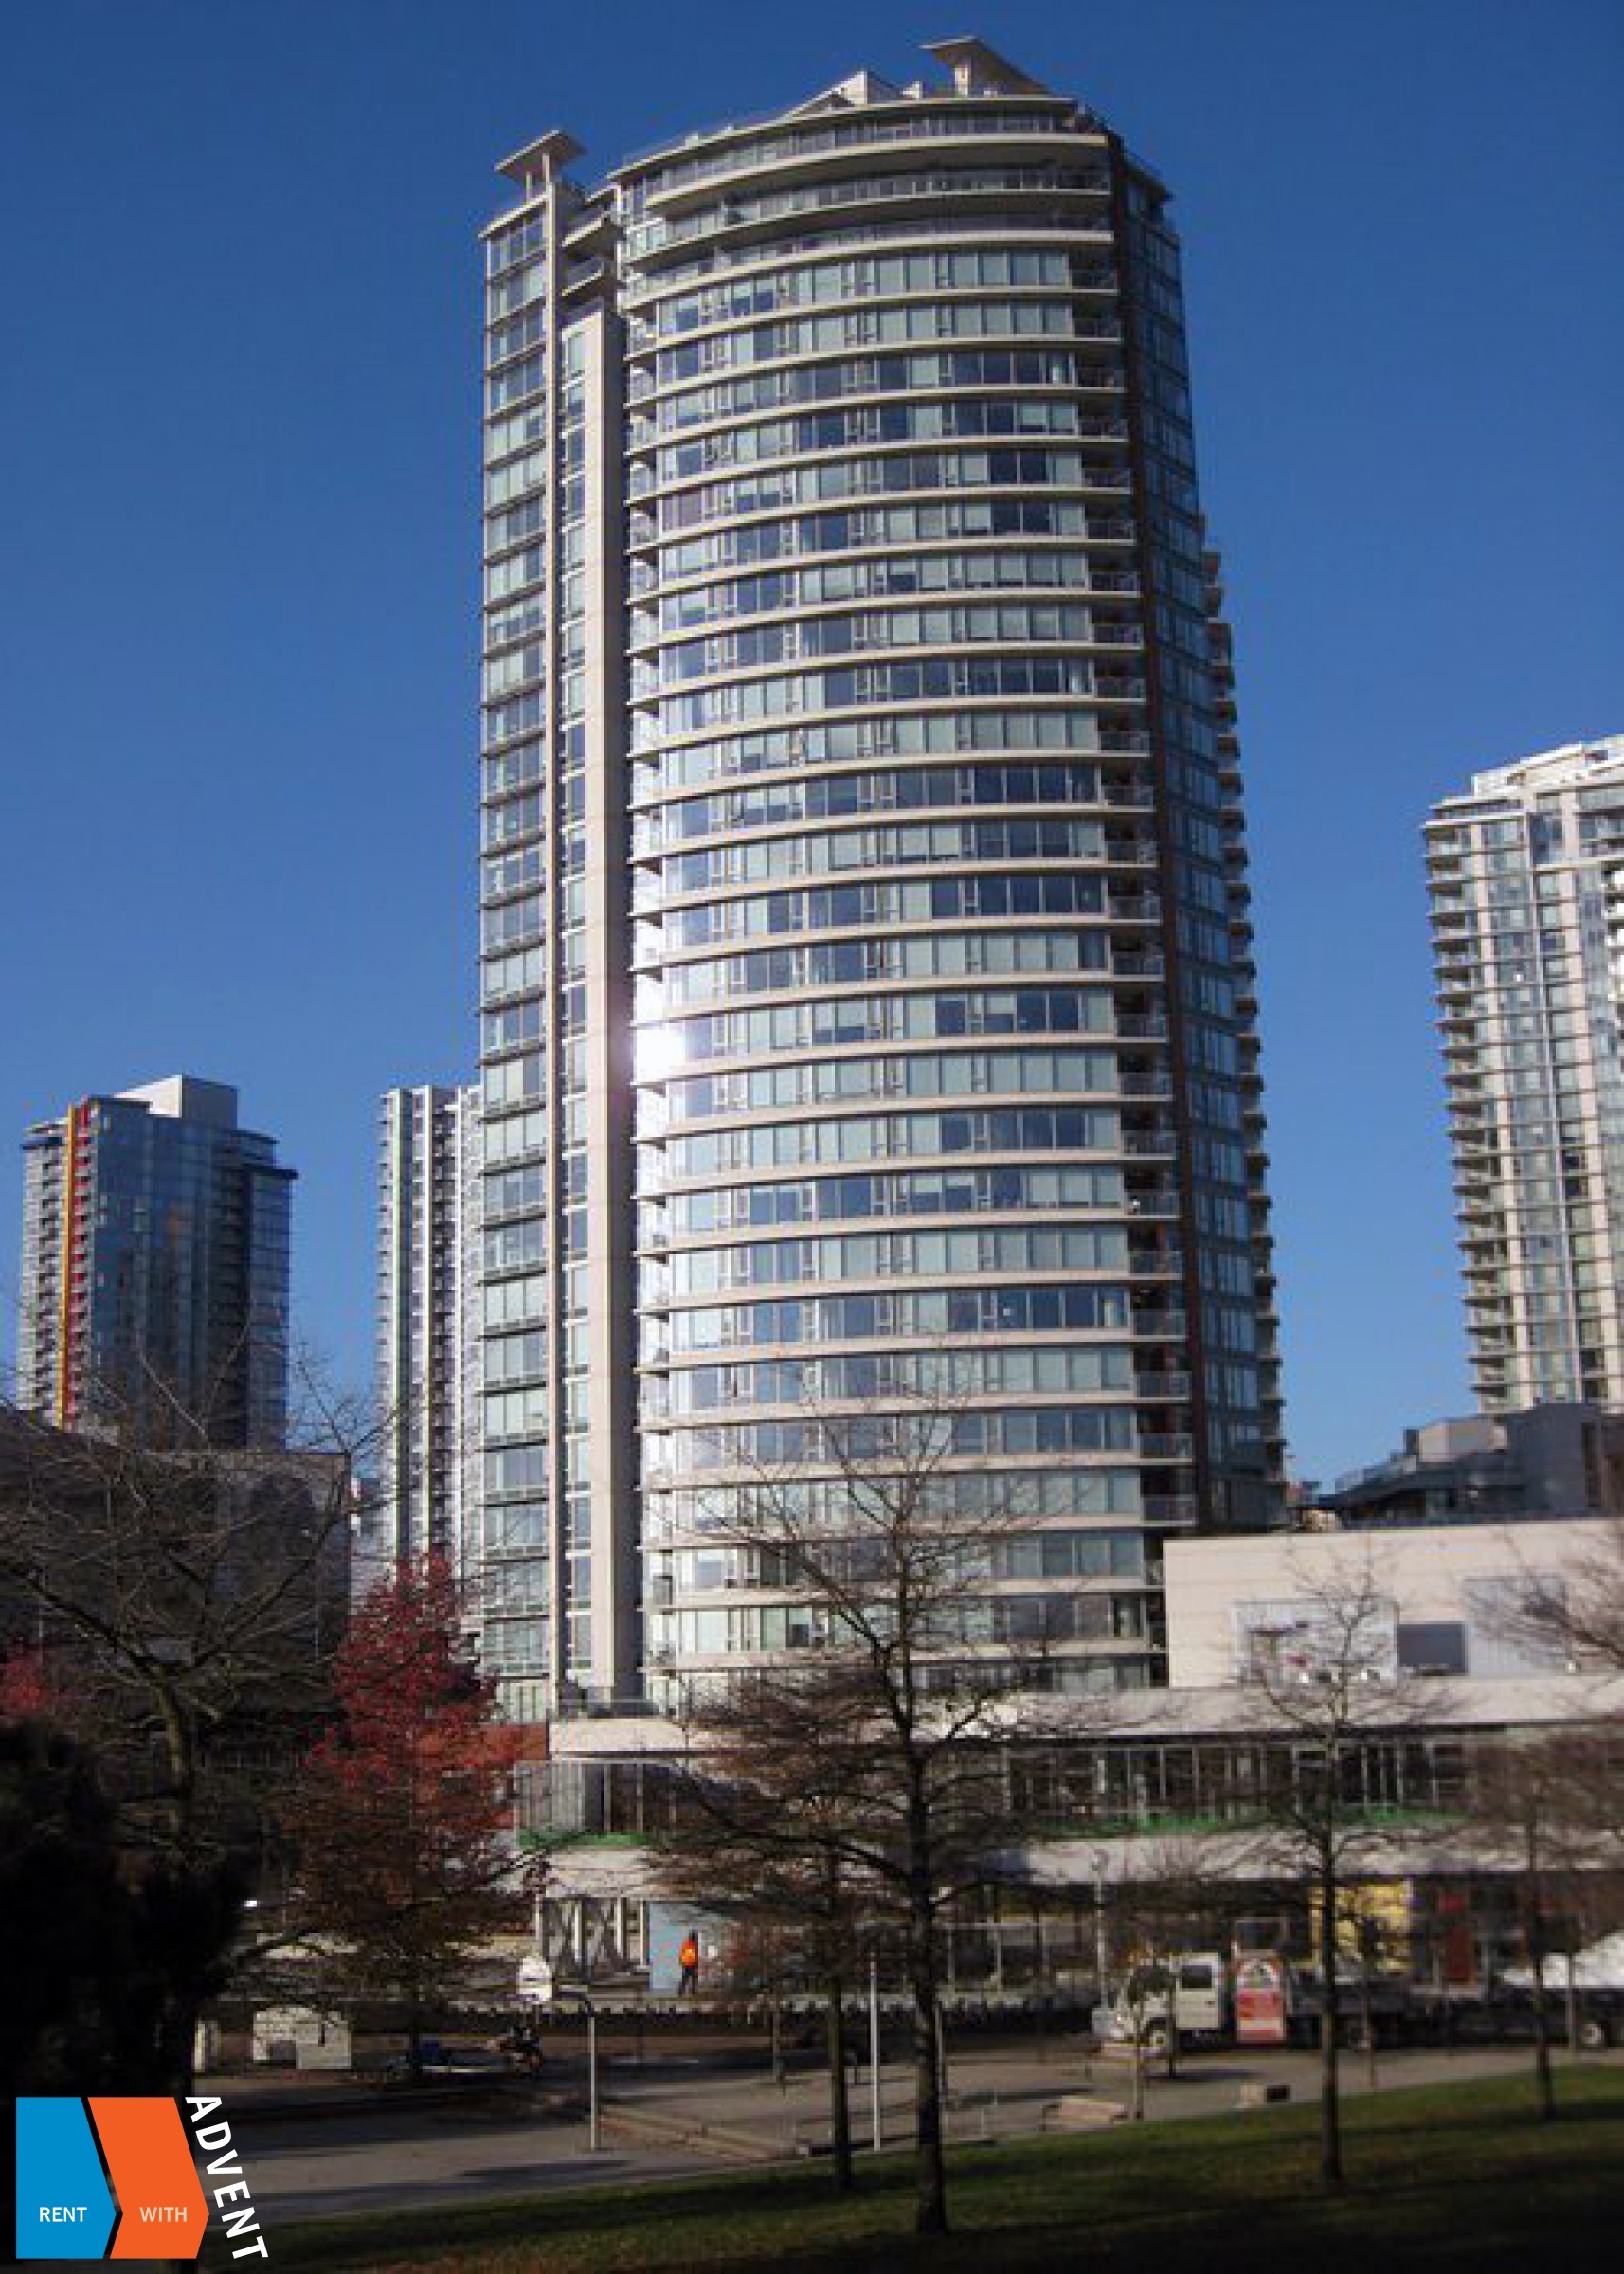 5th Floor Unfurnished 1 Bedroom & Flex Apartment For Rent at Firenze in Downtown Vancouver. 503 - 688 Abbott Street, Vancouver, BC, Canada.